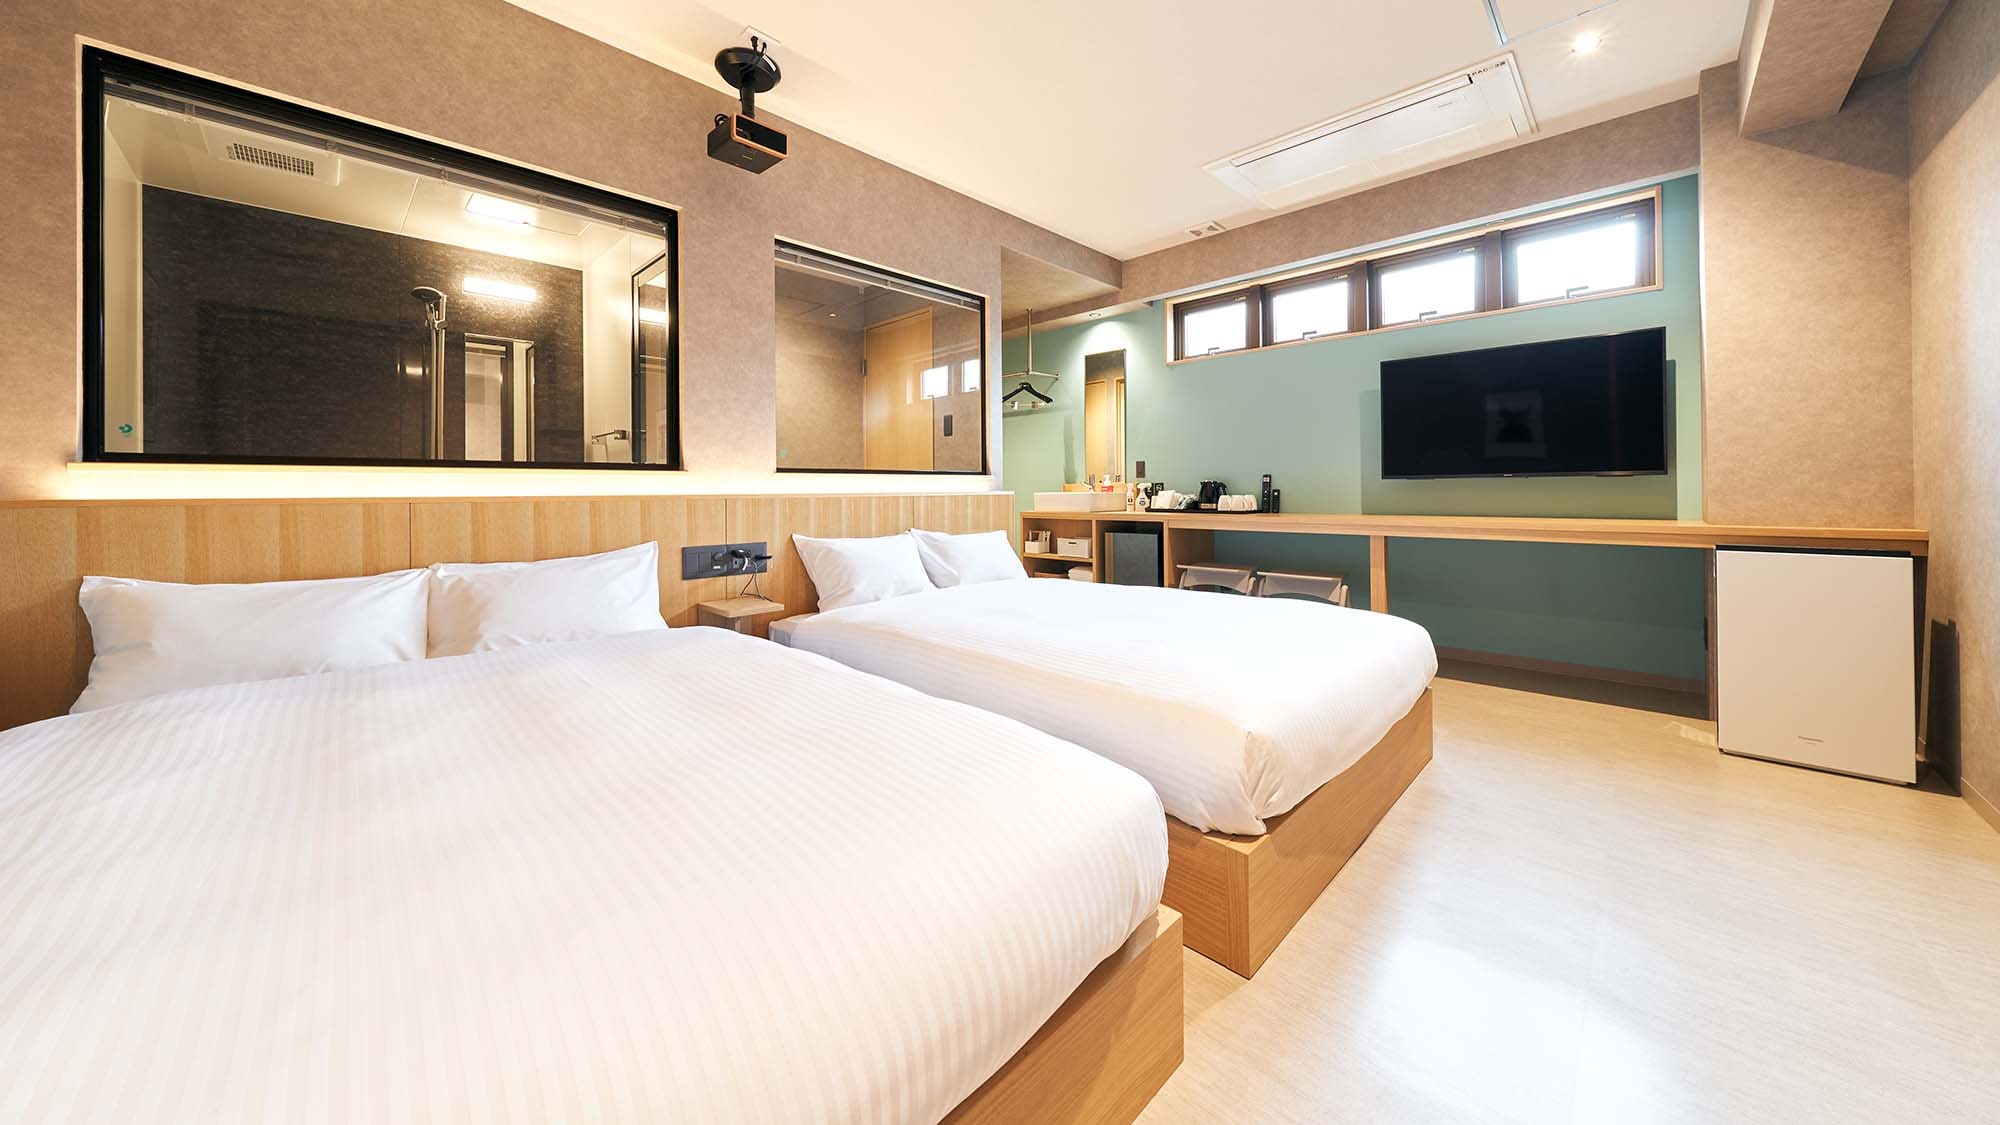 ・ [1st floor] Twin room / Room based on refreshing green is a spacious 28m2 design!